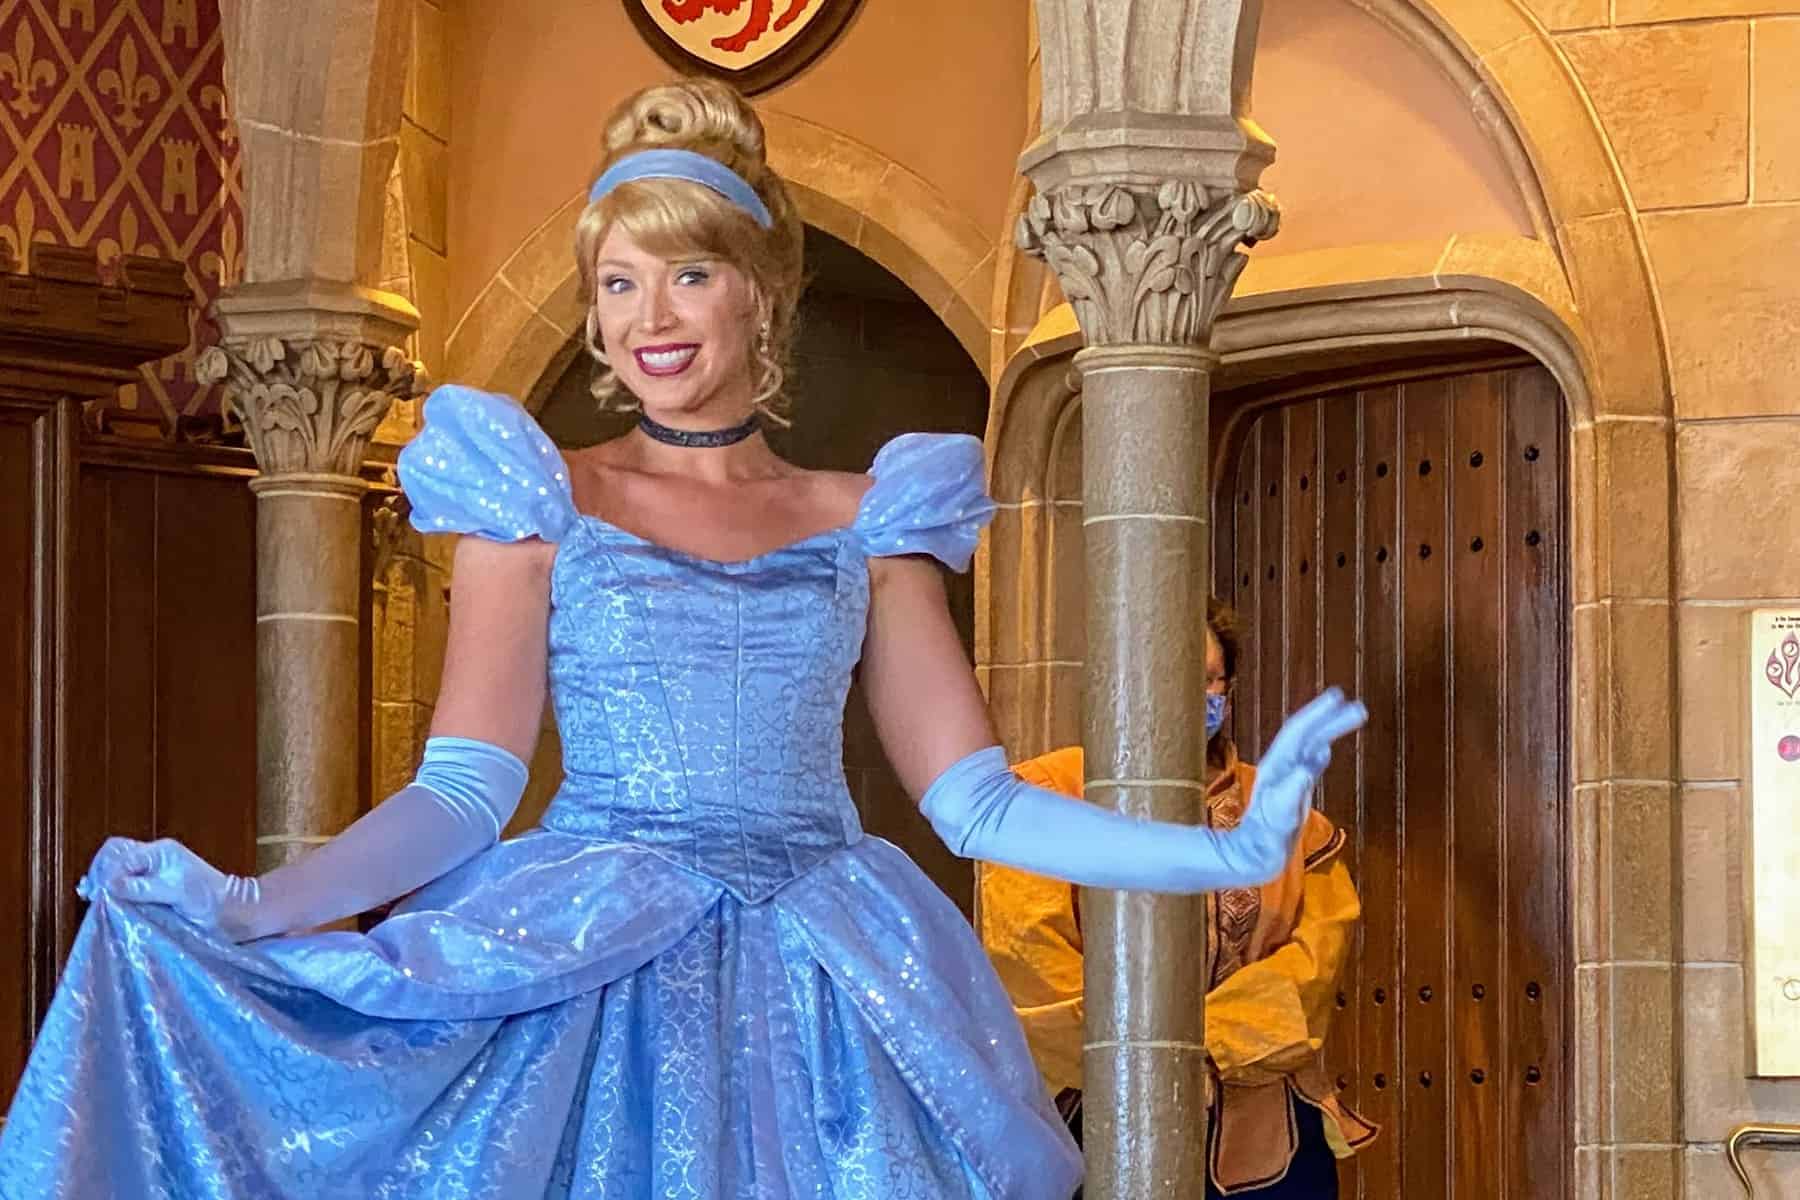 Review of Cinderella’s Royal Table (now that Cinderella is back)